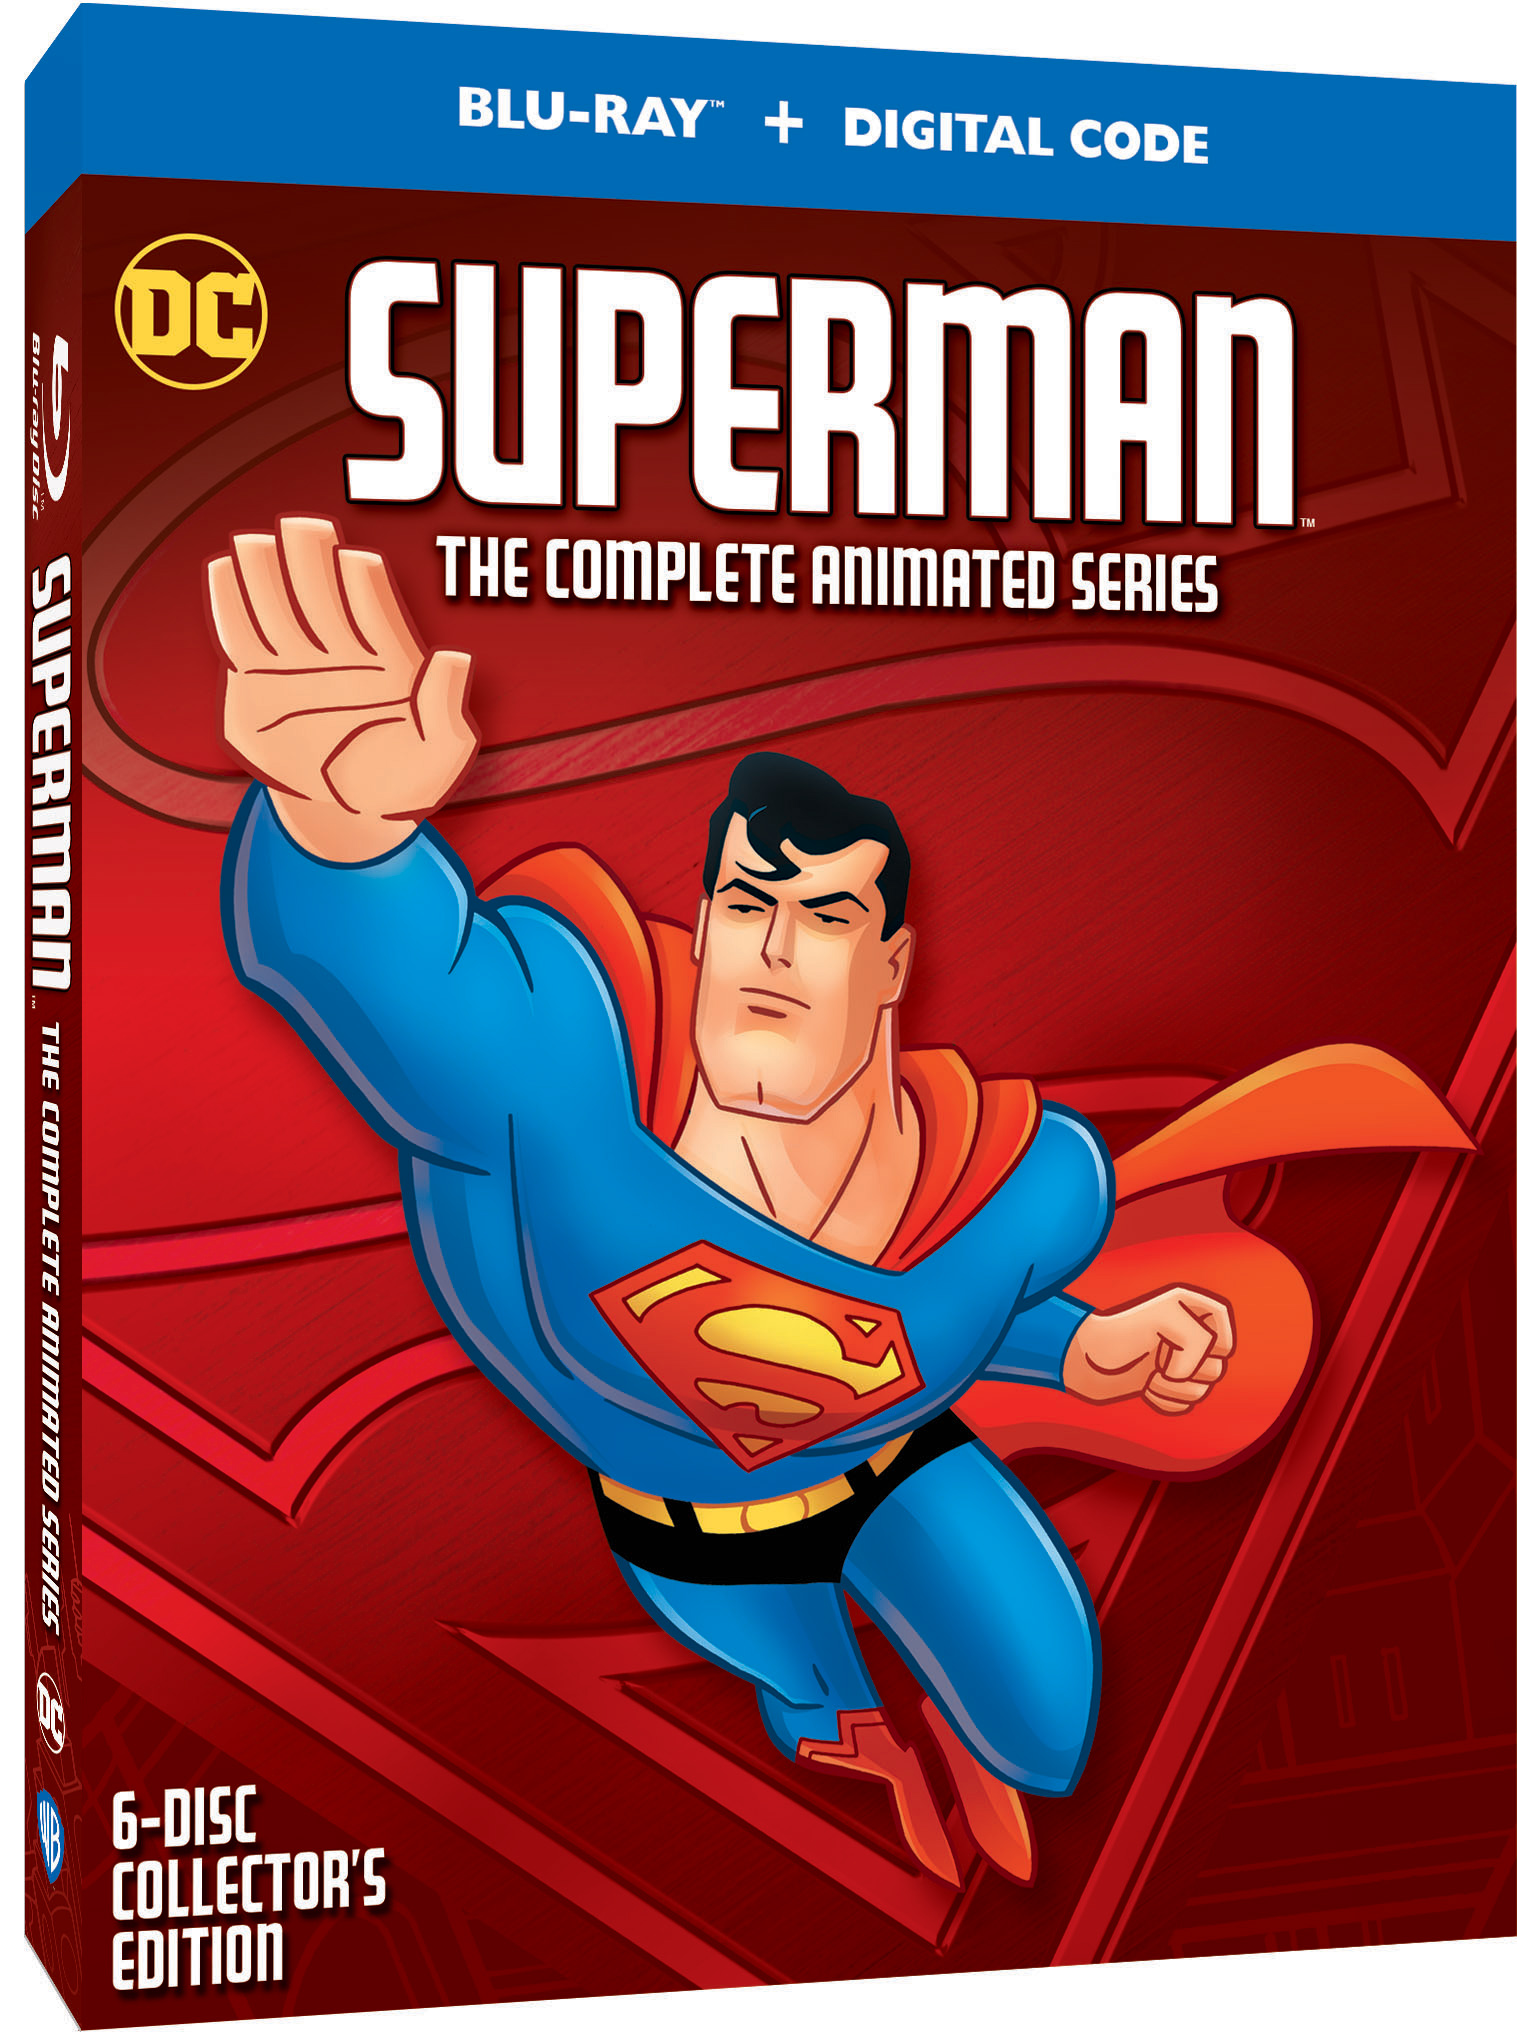 Superman The Complete Animated Series Blu-Ray Launches This October